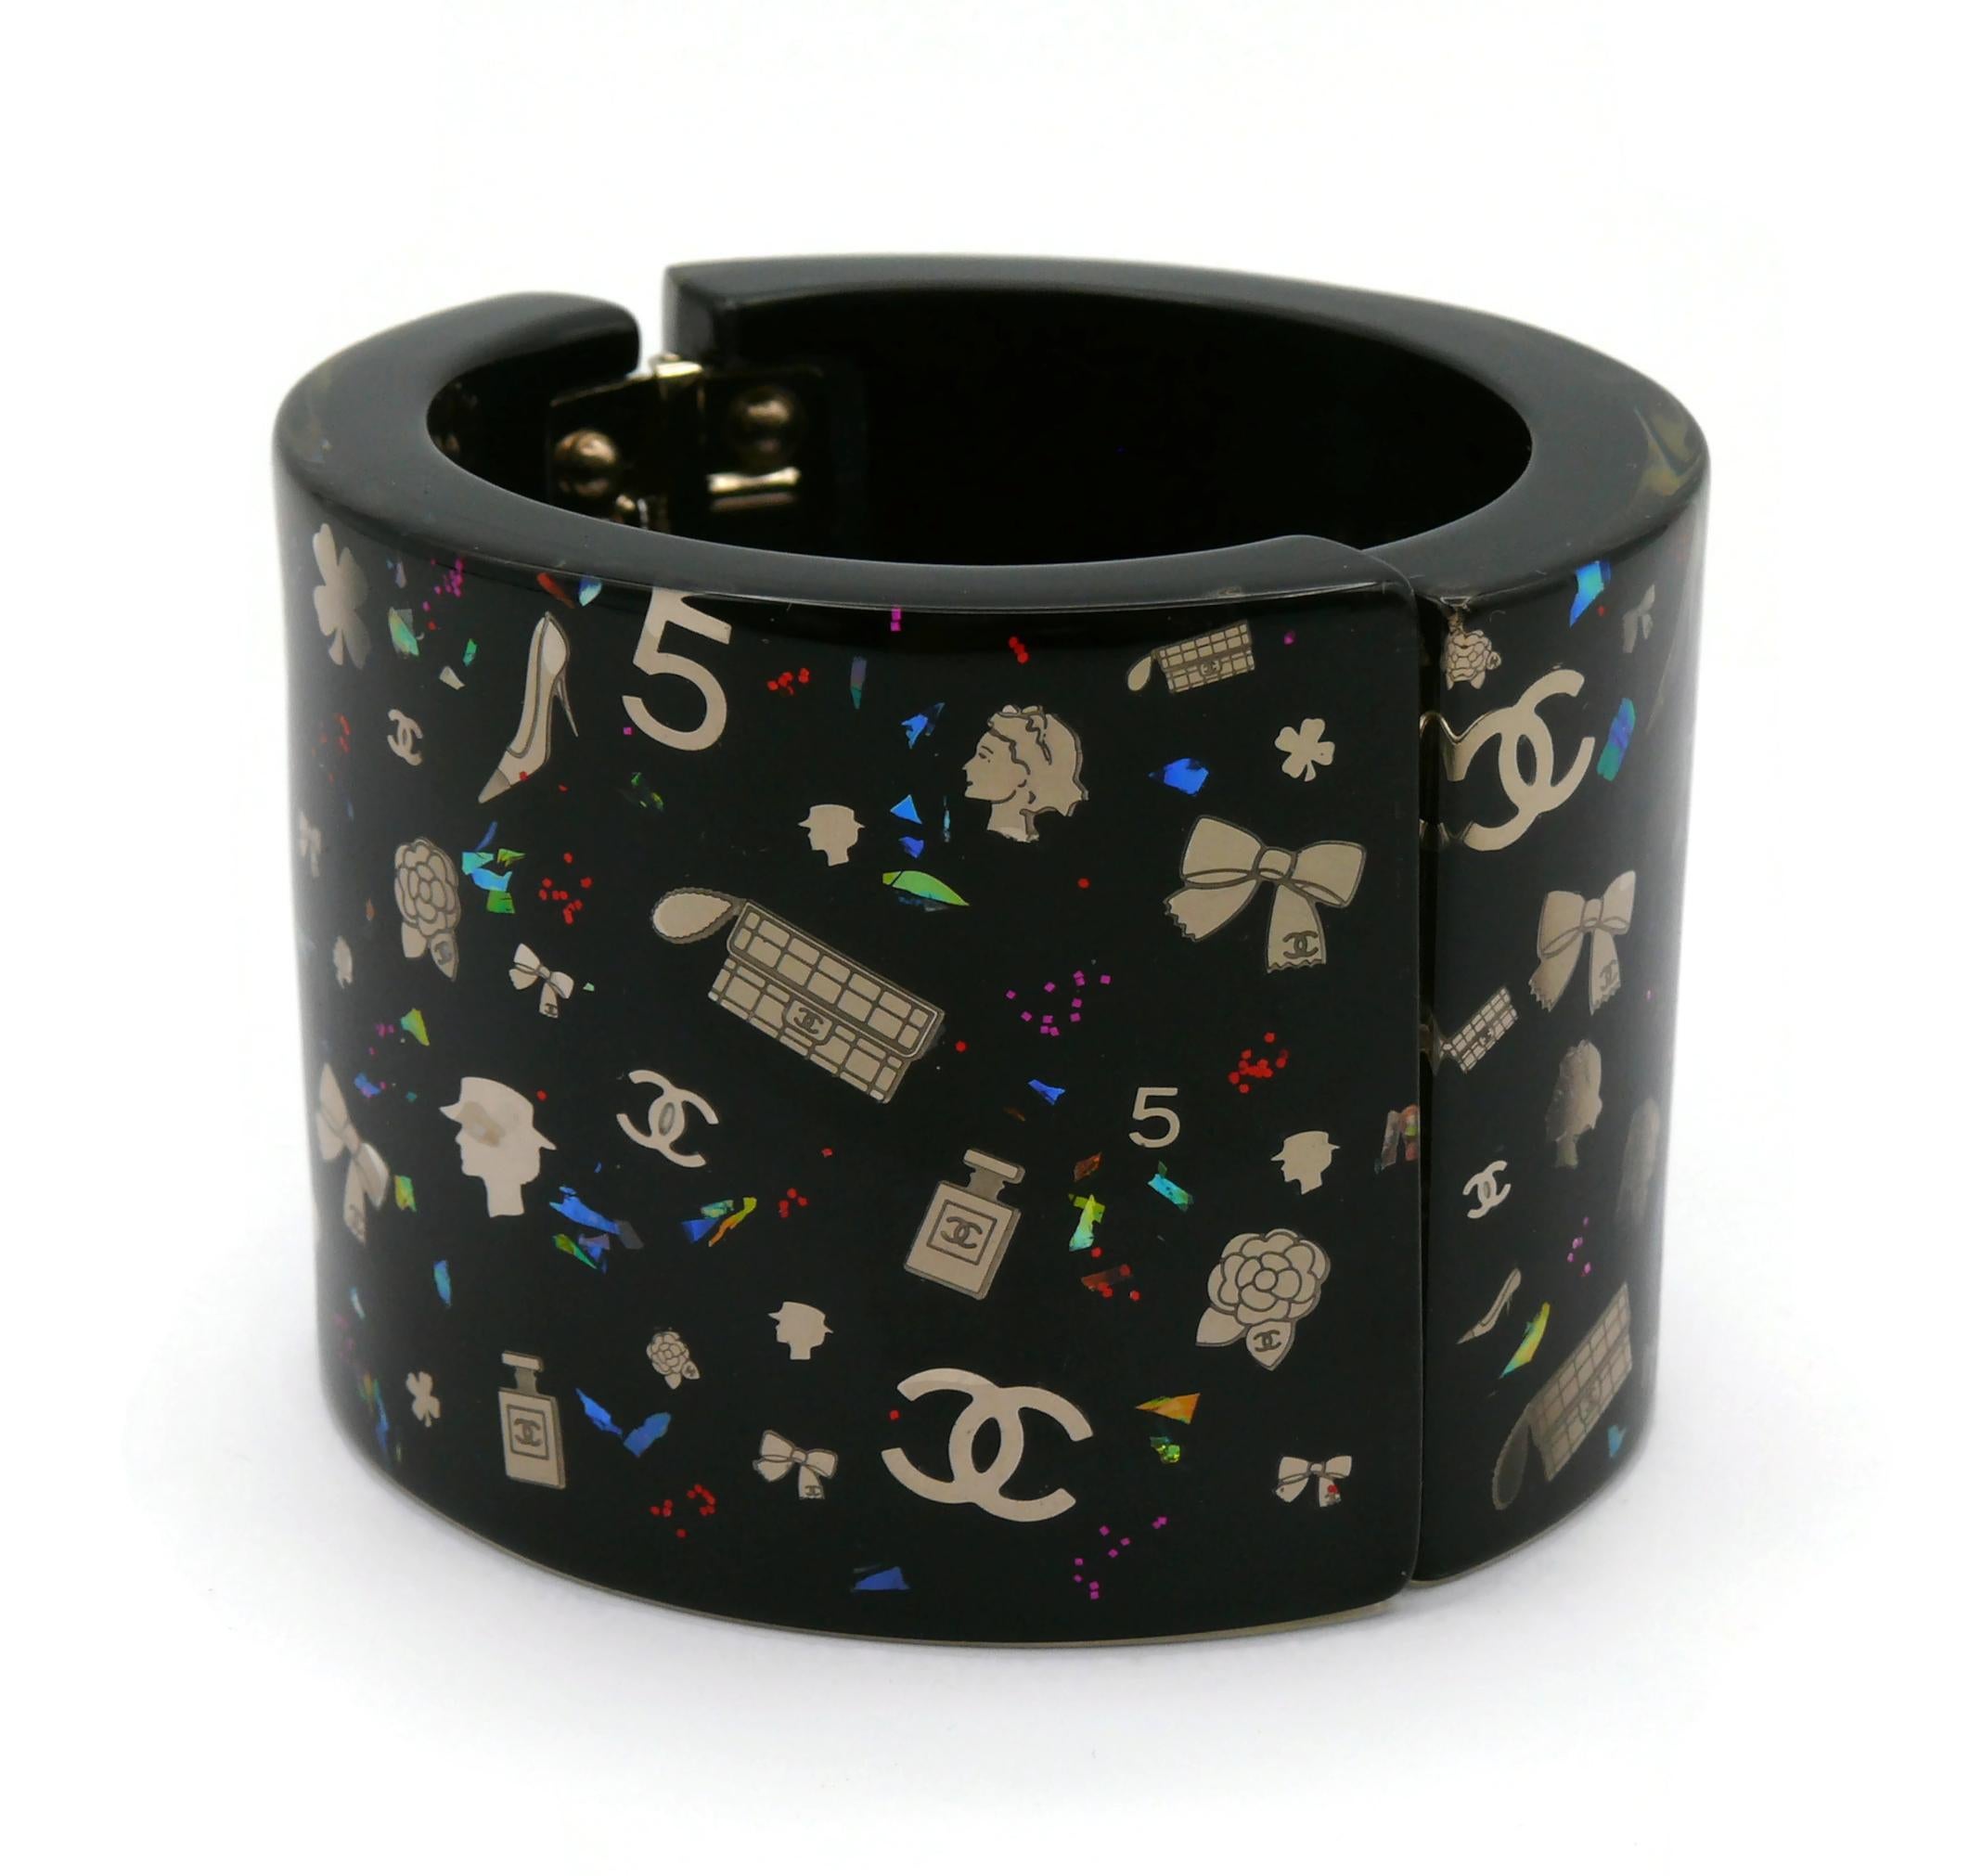 CHANEL by KARL LAGERFELD Iconic Symbols Black Cuff Bracelet, Fall 2006 For Sale 5